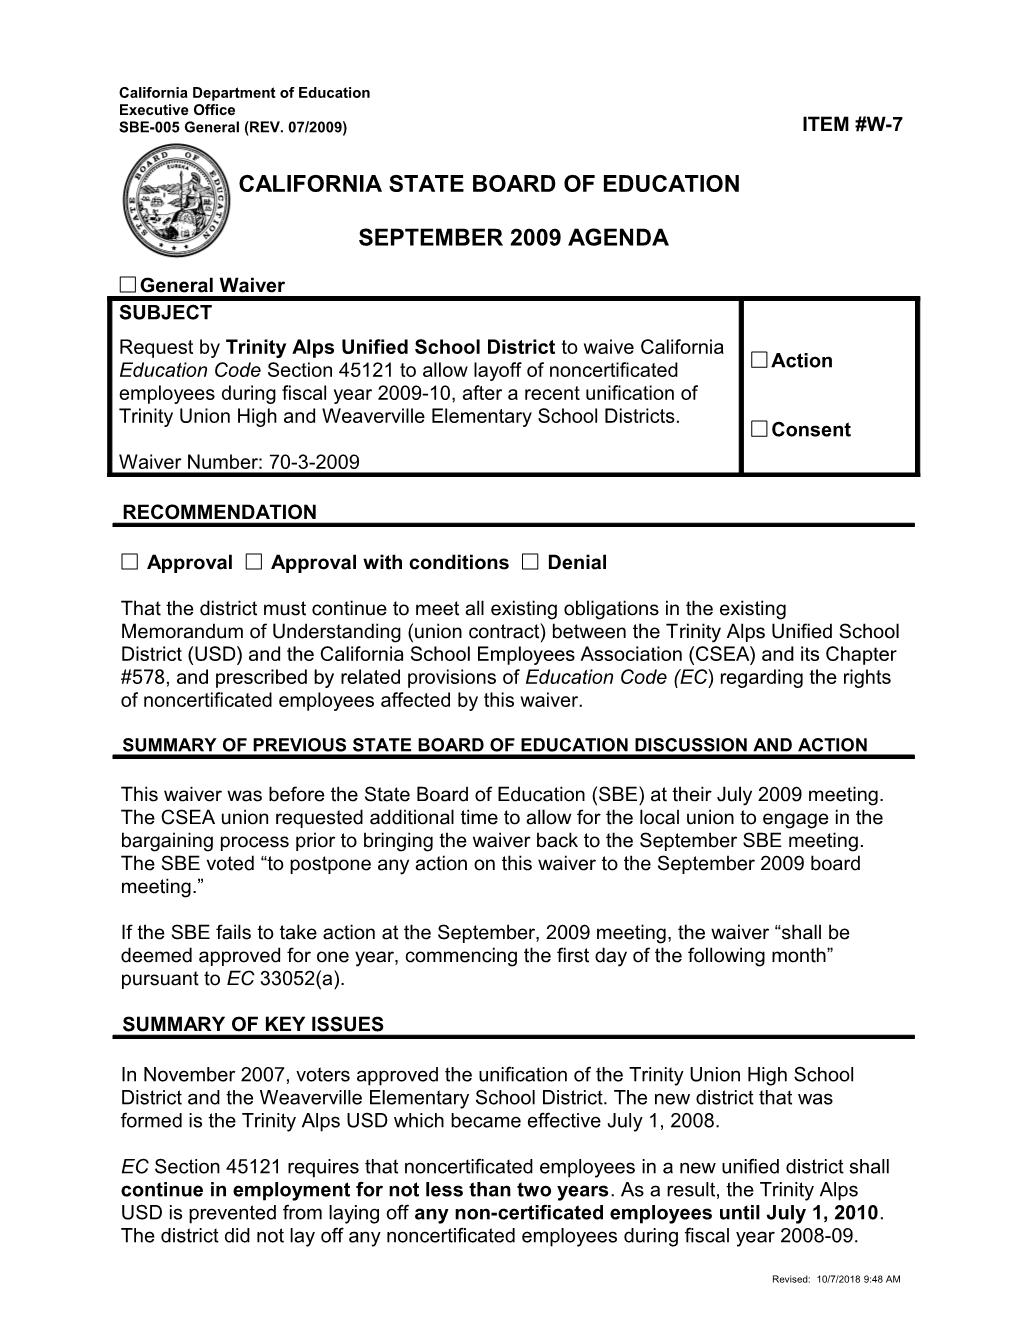 September 2009 Waiver Item W7 - Meeting Agendas (CA State Board of Education)